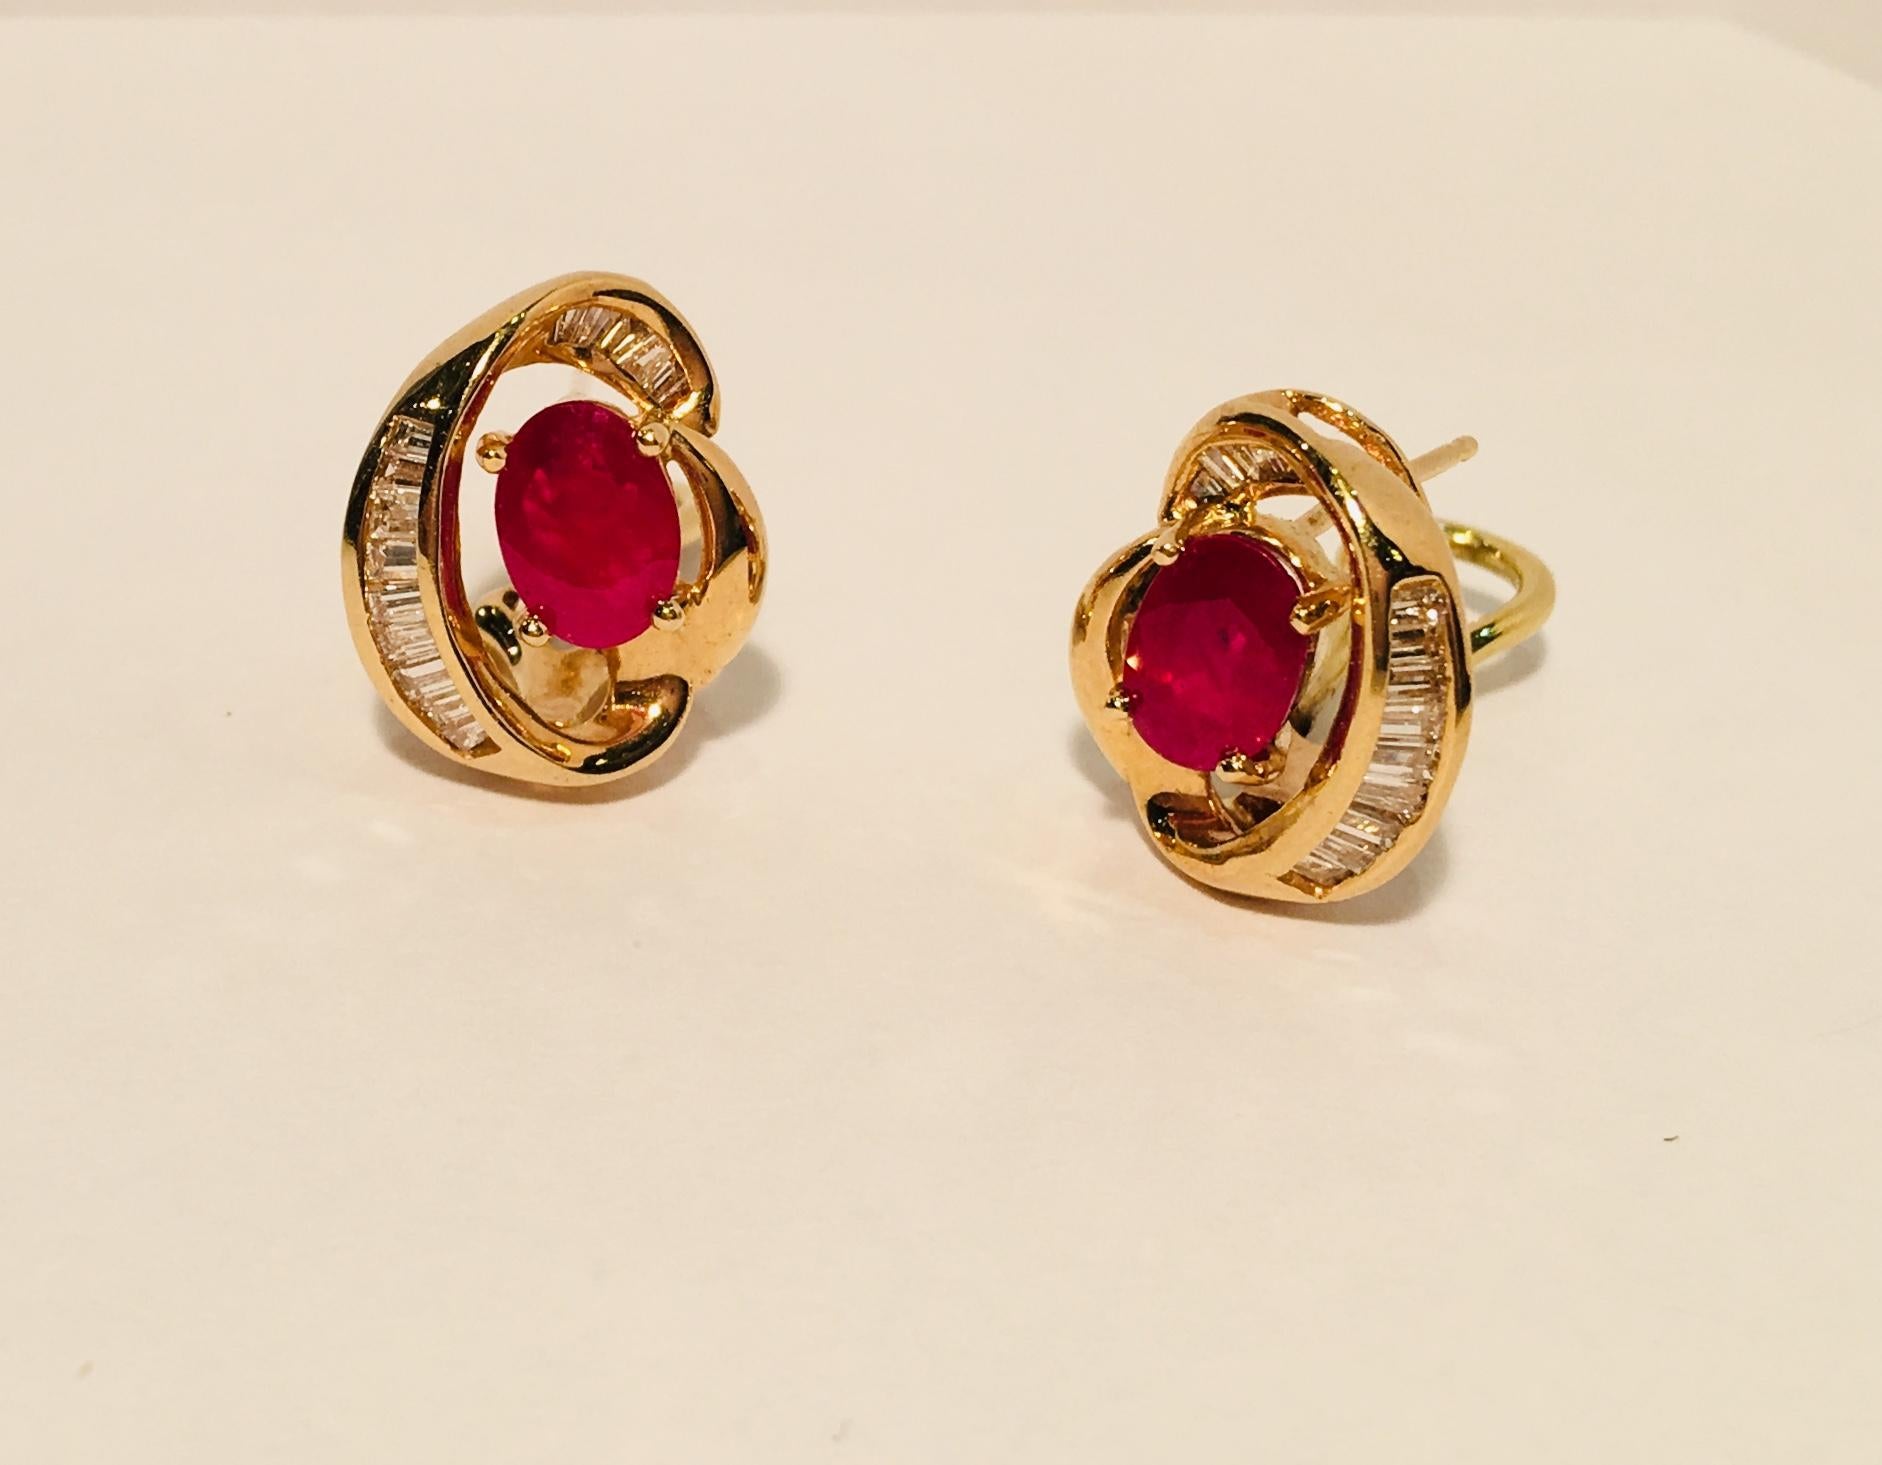 Classic 14 karat yellow gold omega or lever back earrings for pierced ears feature a prong set, oval cut, bright pigeon blood red ruby surrounded by swirls of invisibly set baguette diamonds.

2 rubies measure 7.19 mm x 5.09 mm x 3.4 mm and weigh